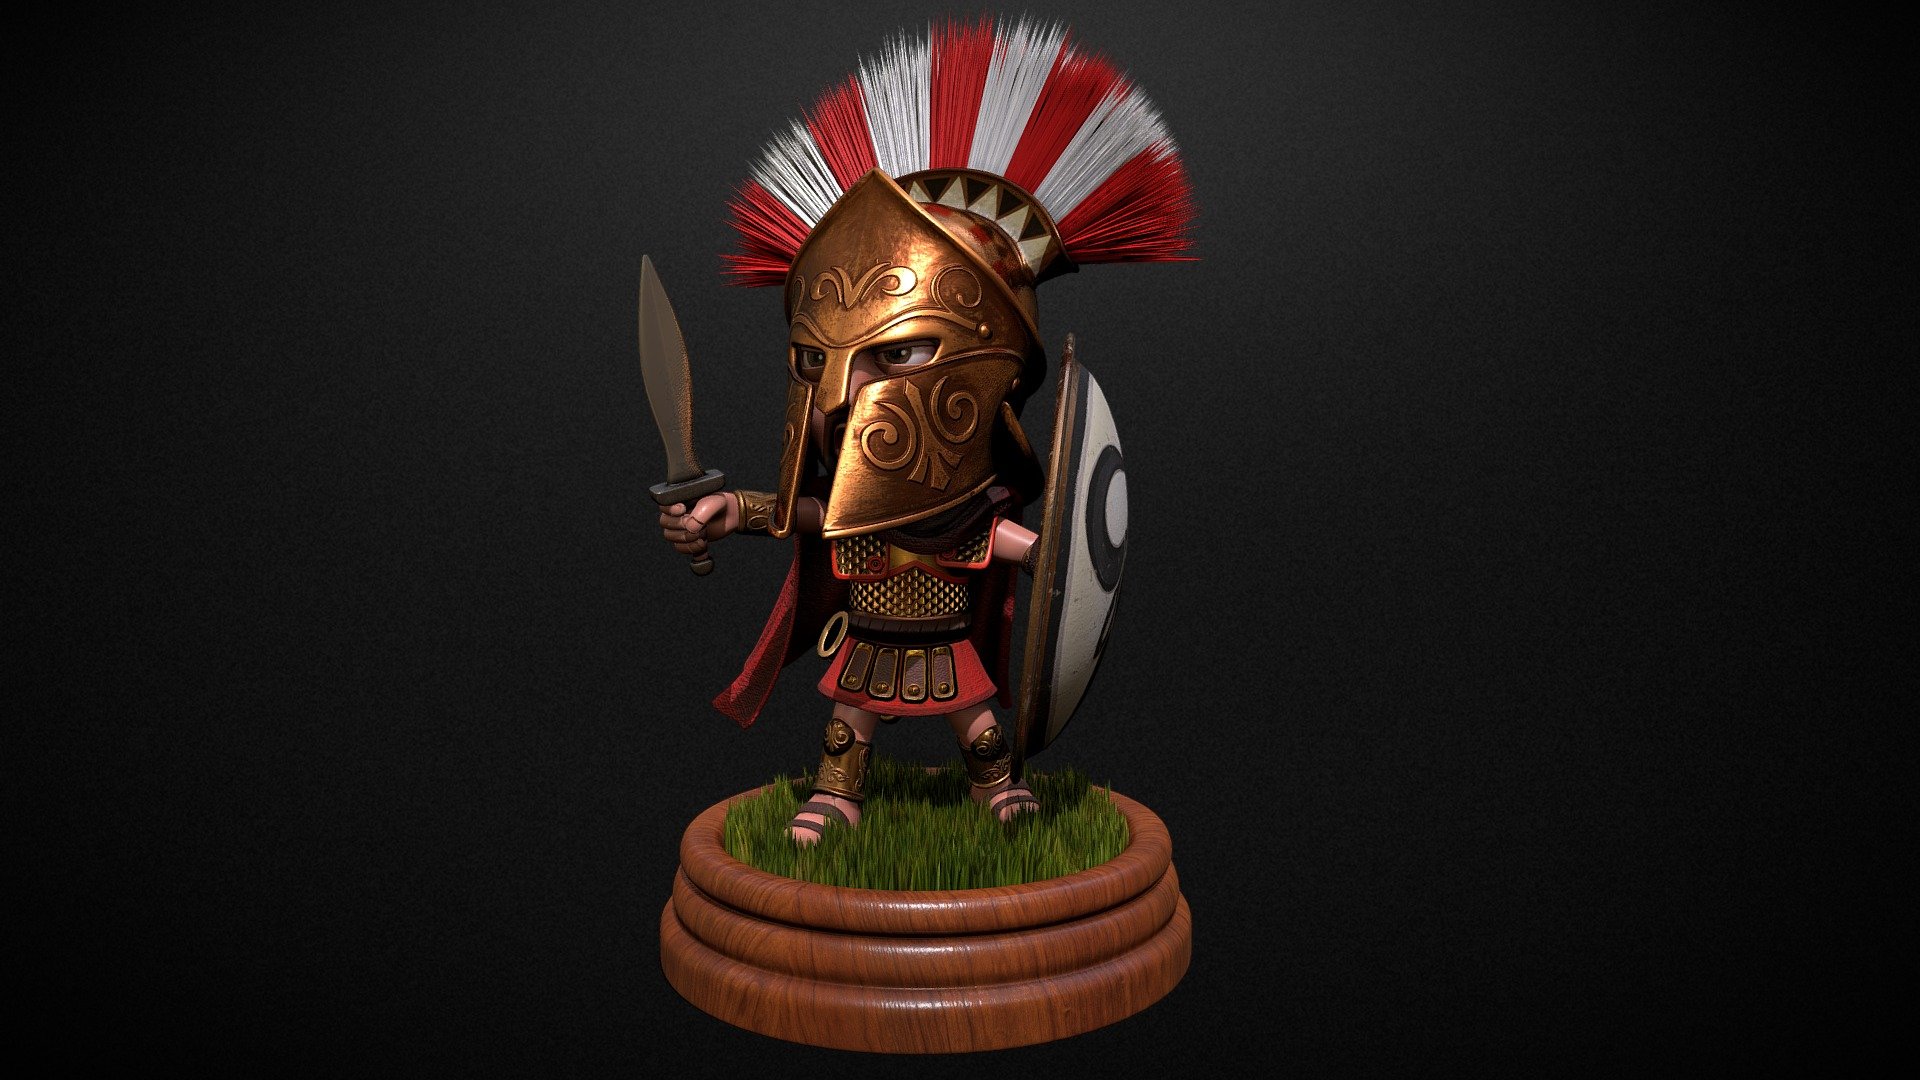 3d model of Spartan enomotarch in toy style.
Modeling 3dsmax, textuirng 3dcoattextura 3d model